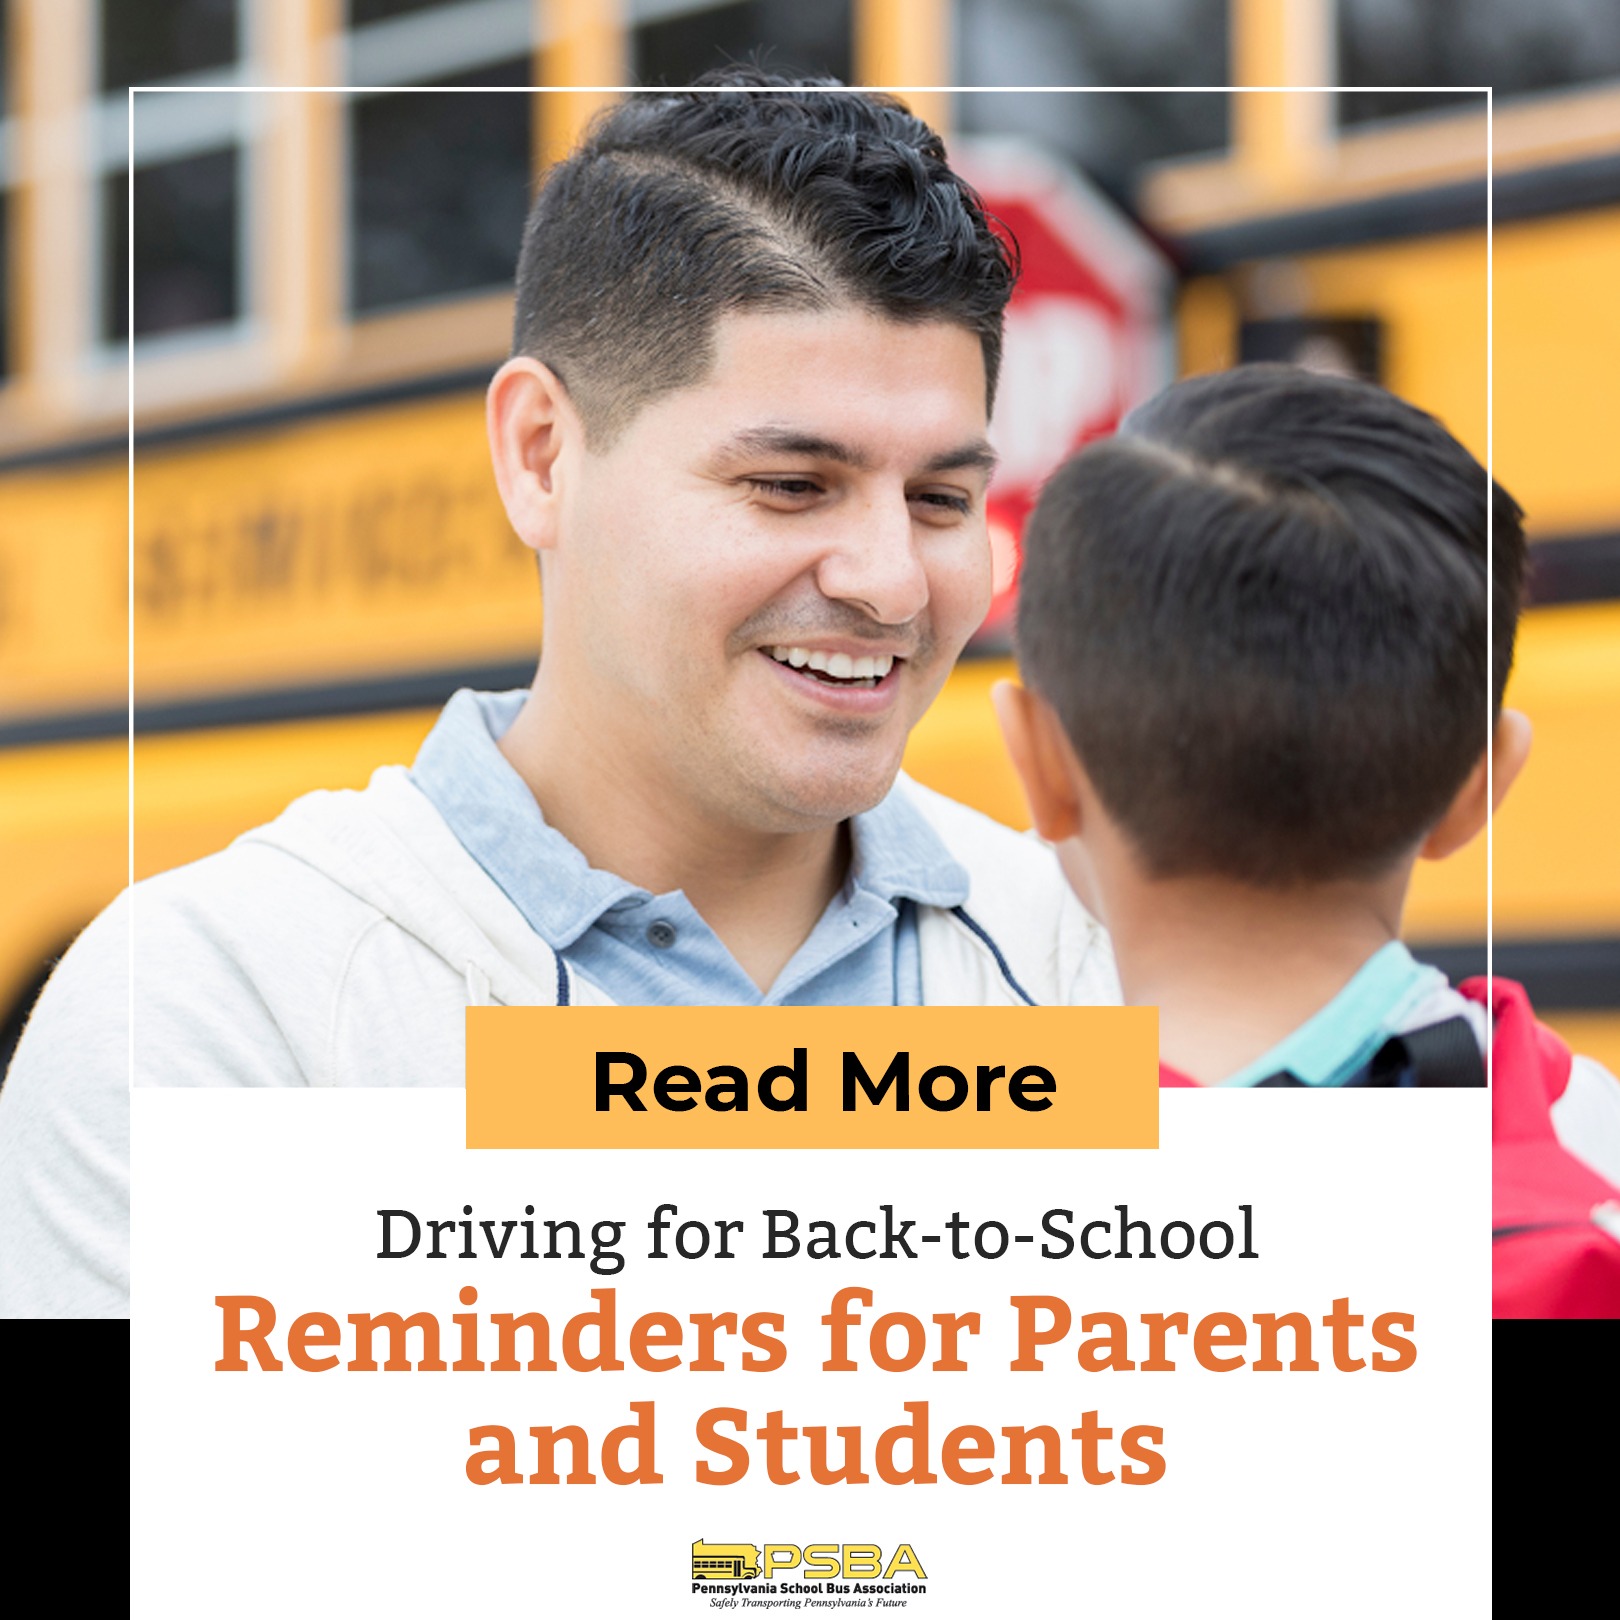 Driving for Back-to-School – Reminders for Parents and Students